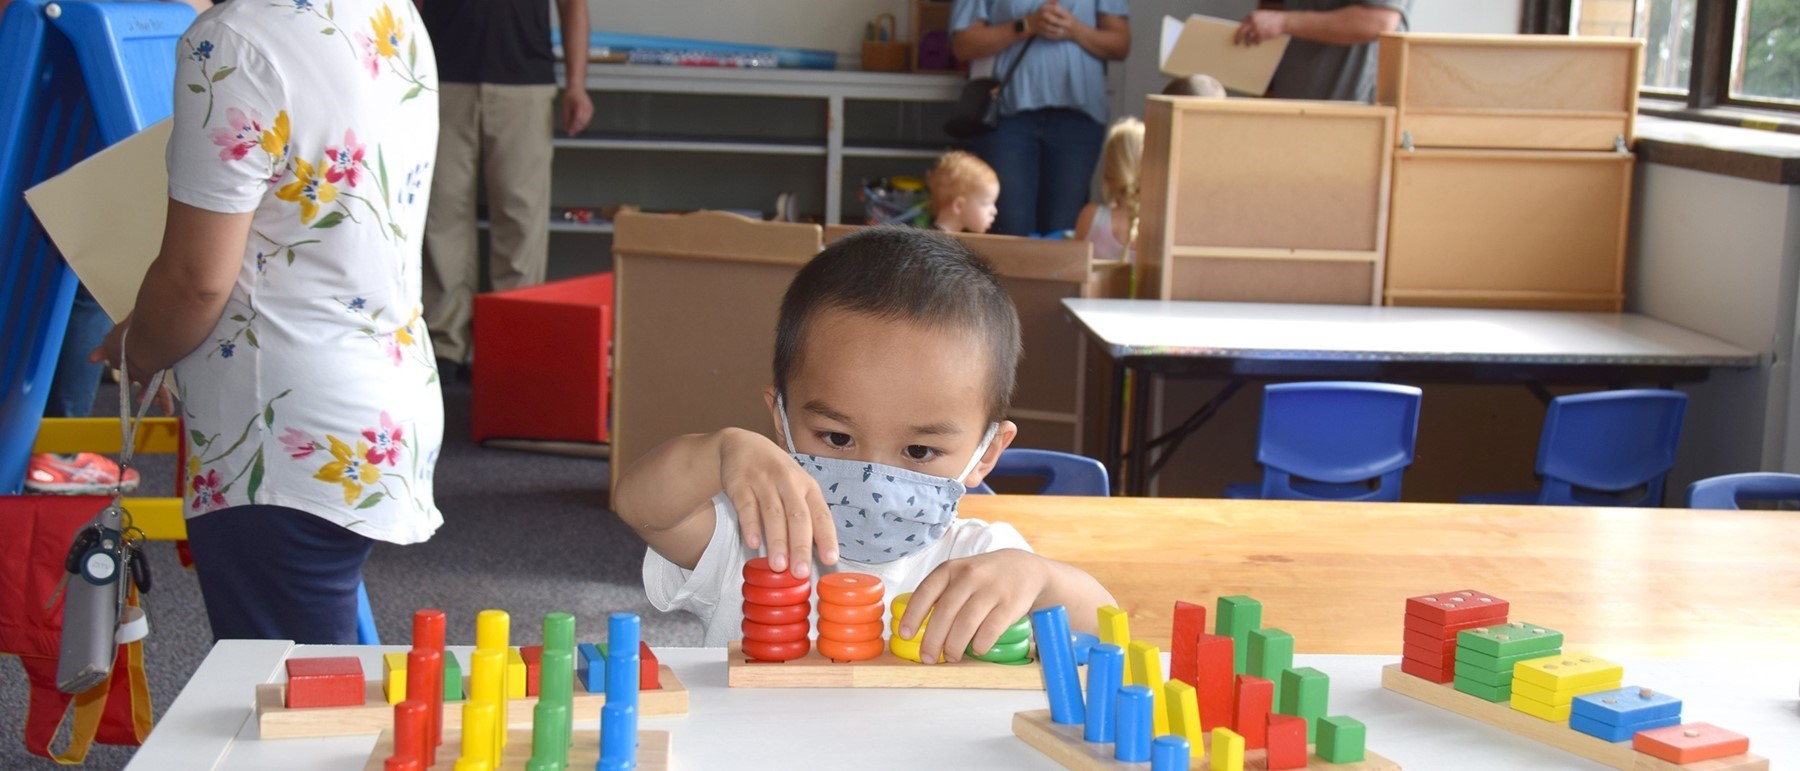 A boy who will be attending the Universal Pre-Kindergarten program at the Cub Care Childrens Center campus plays with colored rings during Orientation.